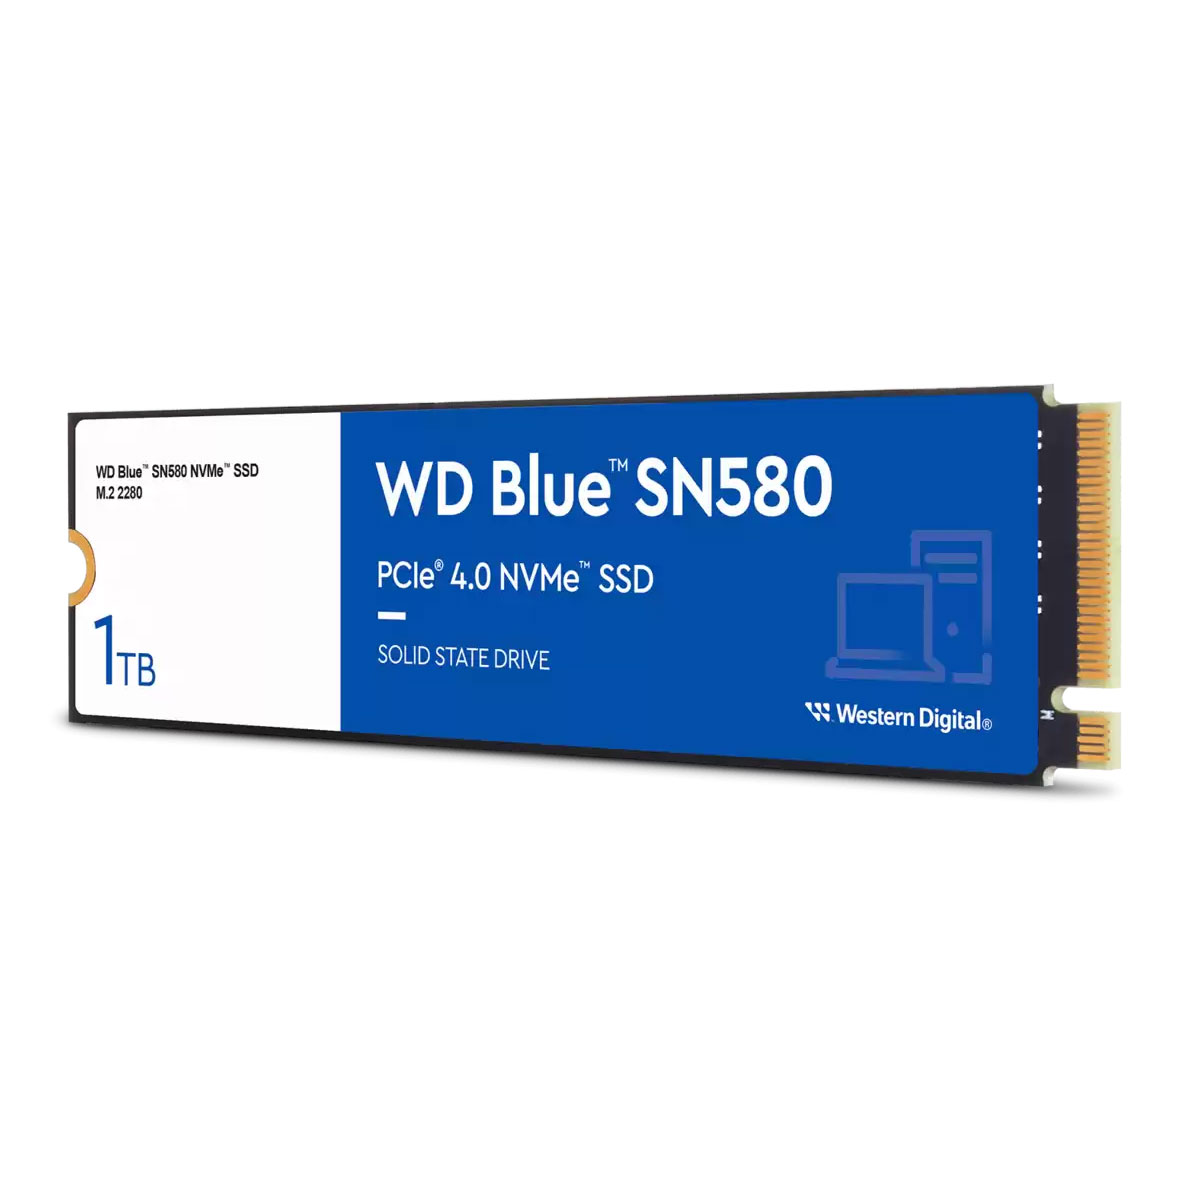 Western Digital Launches New WD Black NVMe SSDs And Thunderbolt Dock